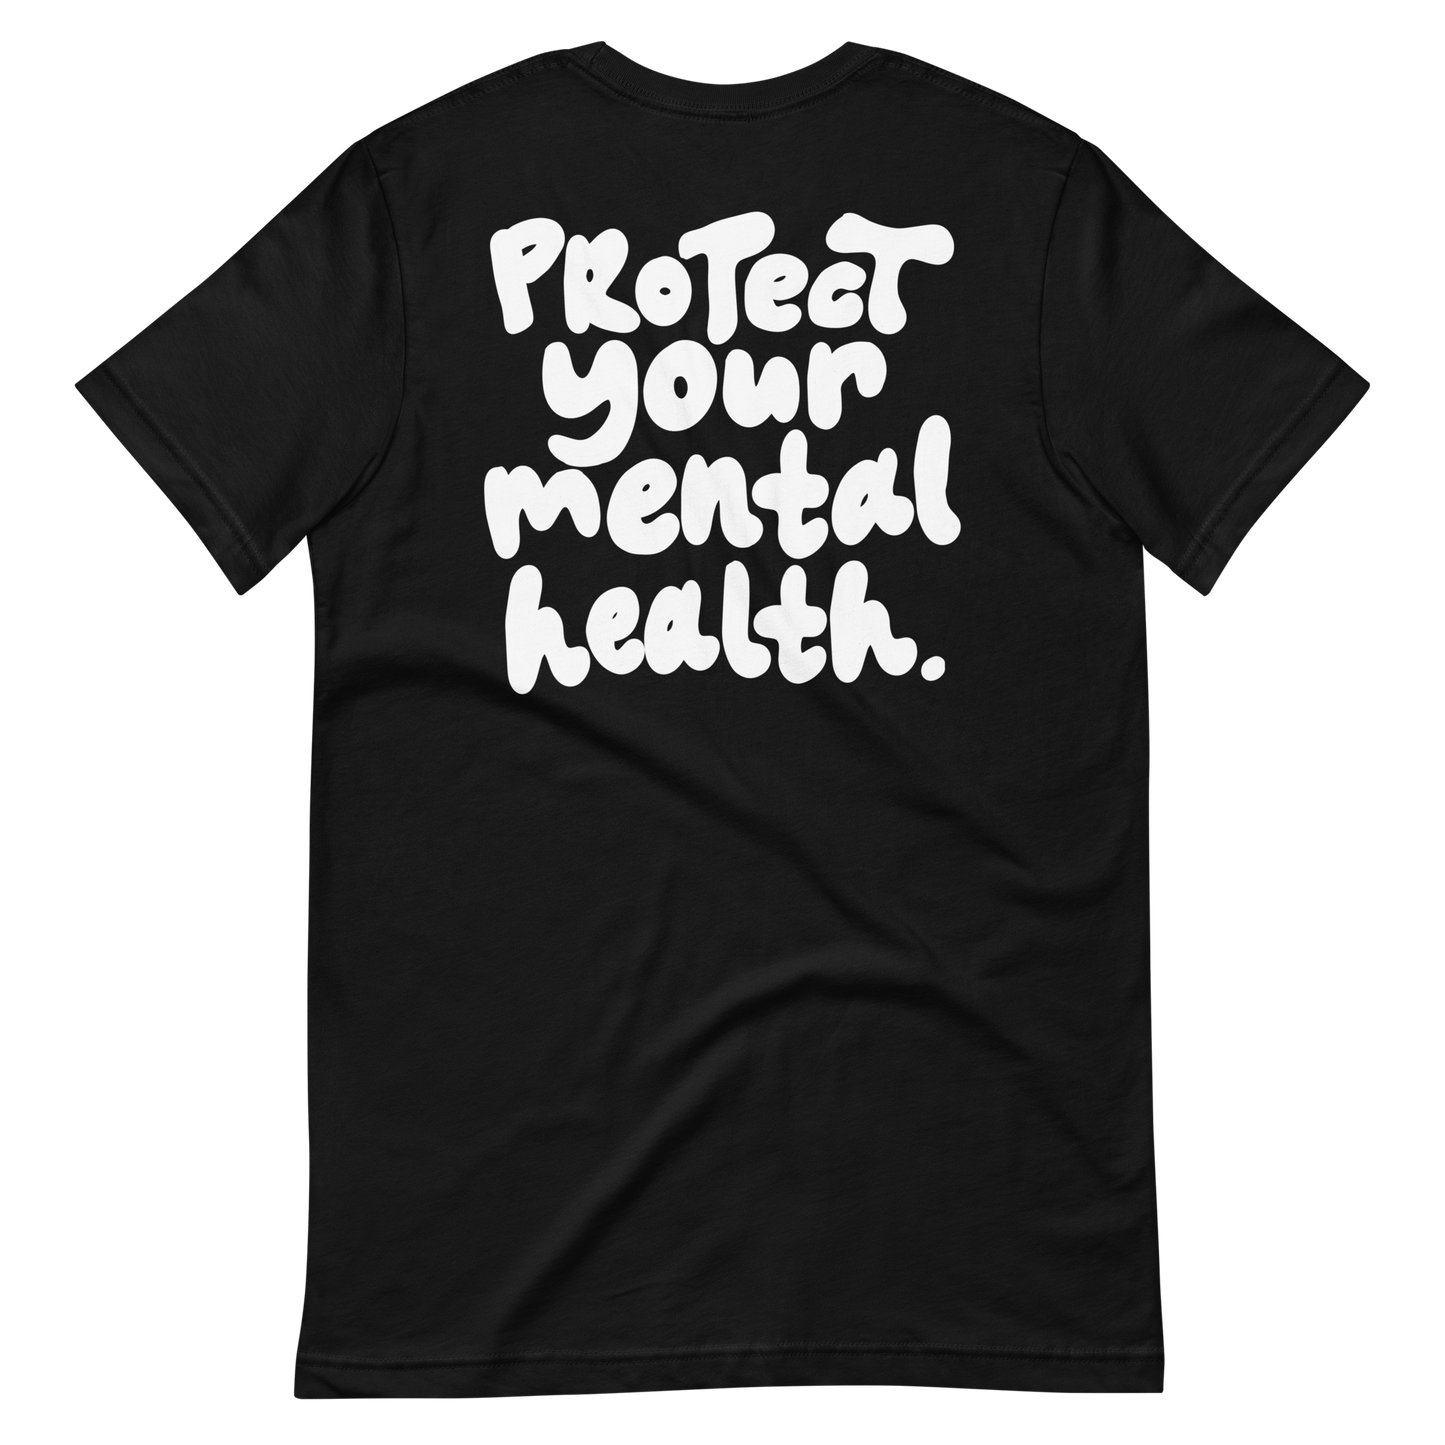 PROTECT YOUR MENTAL HEALTH v2